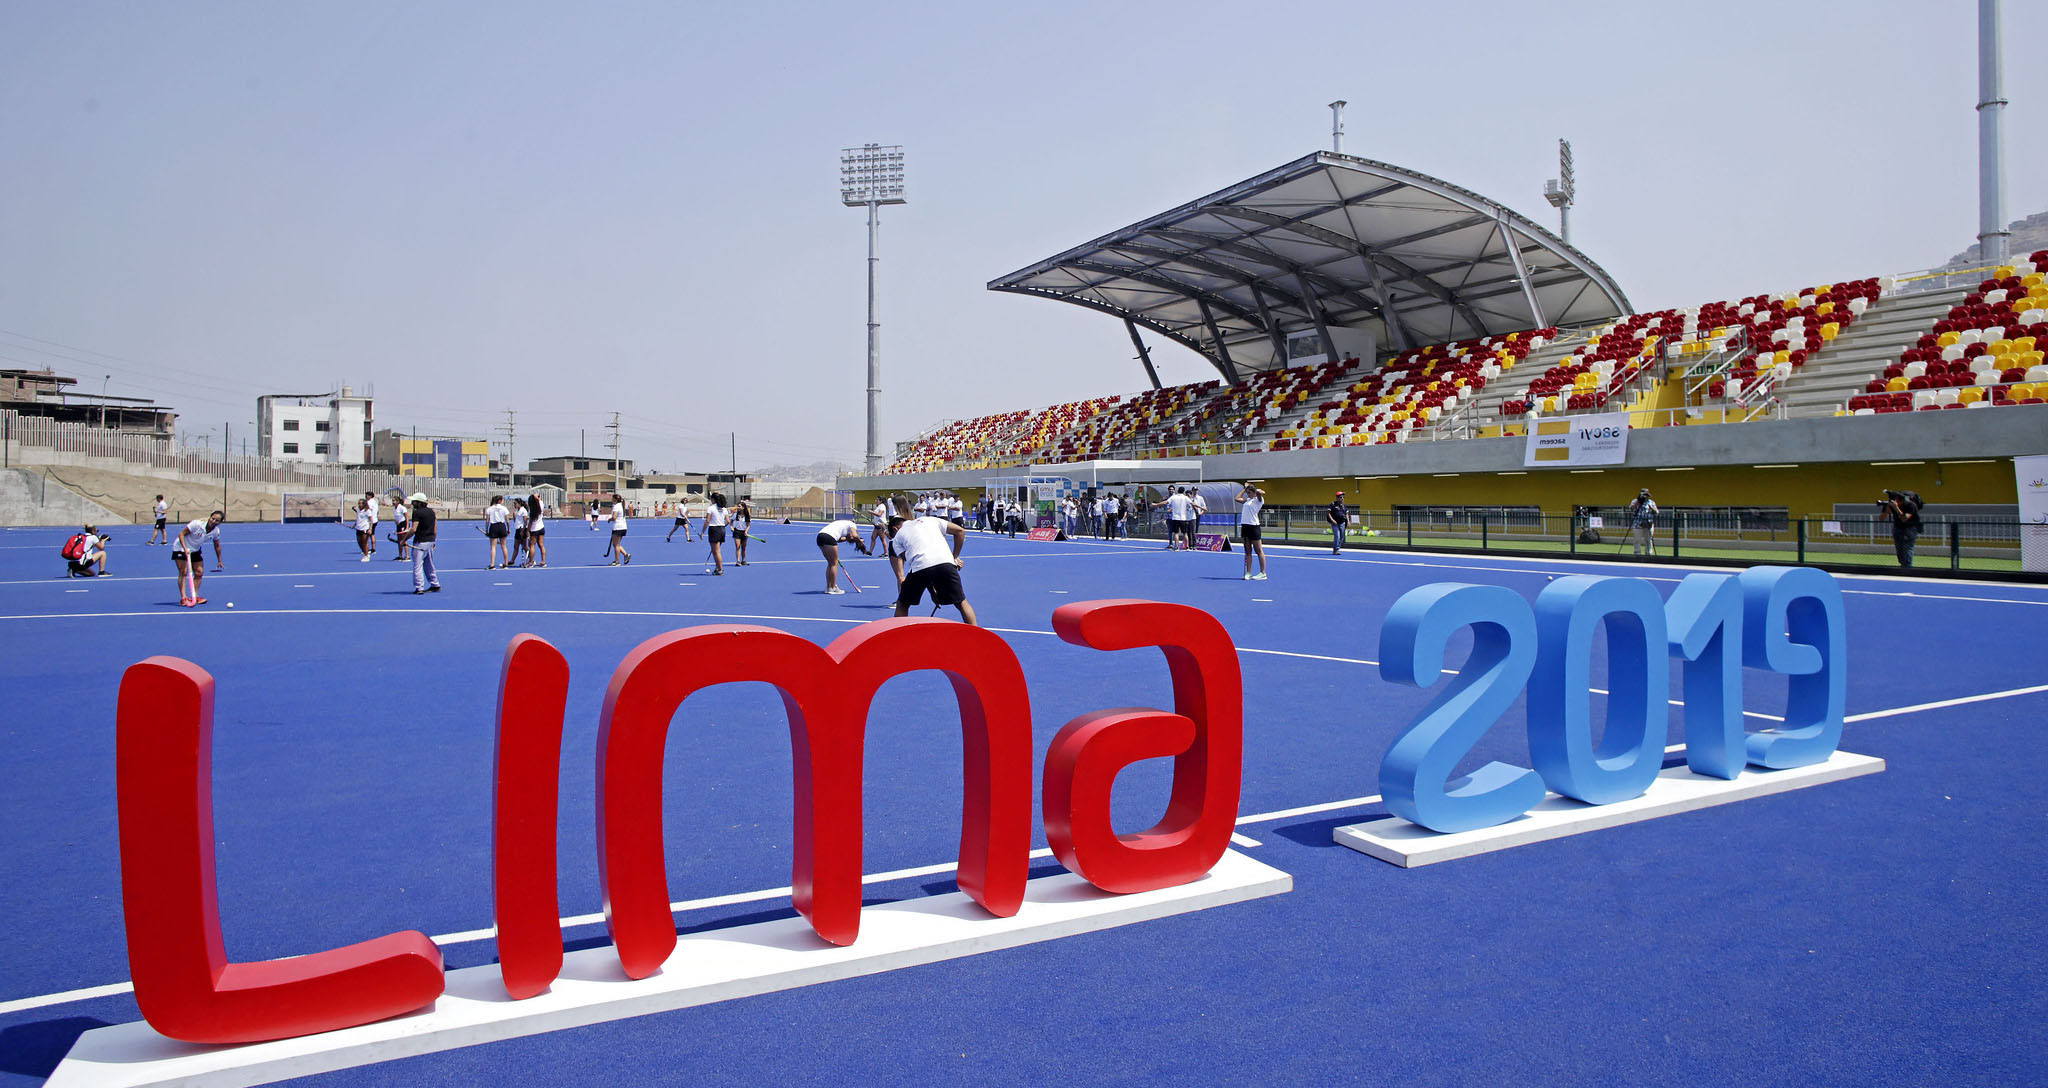 Seats for sporting events, and the Opening and Closing Ceremonies, at the Games can be bought on the Lima 2019 website and at approved ticket outlets ©Lima 2019